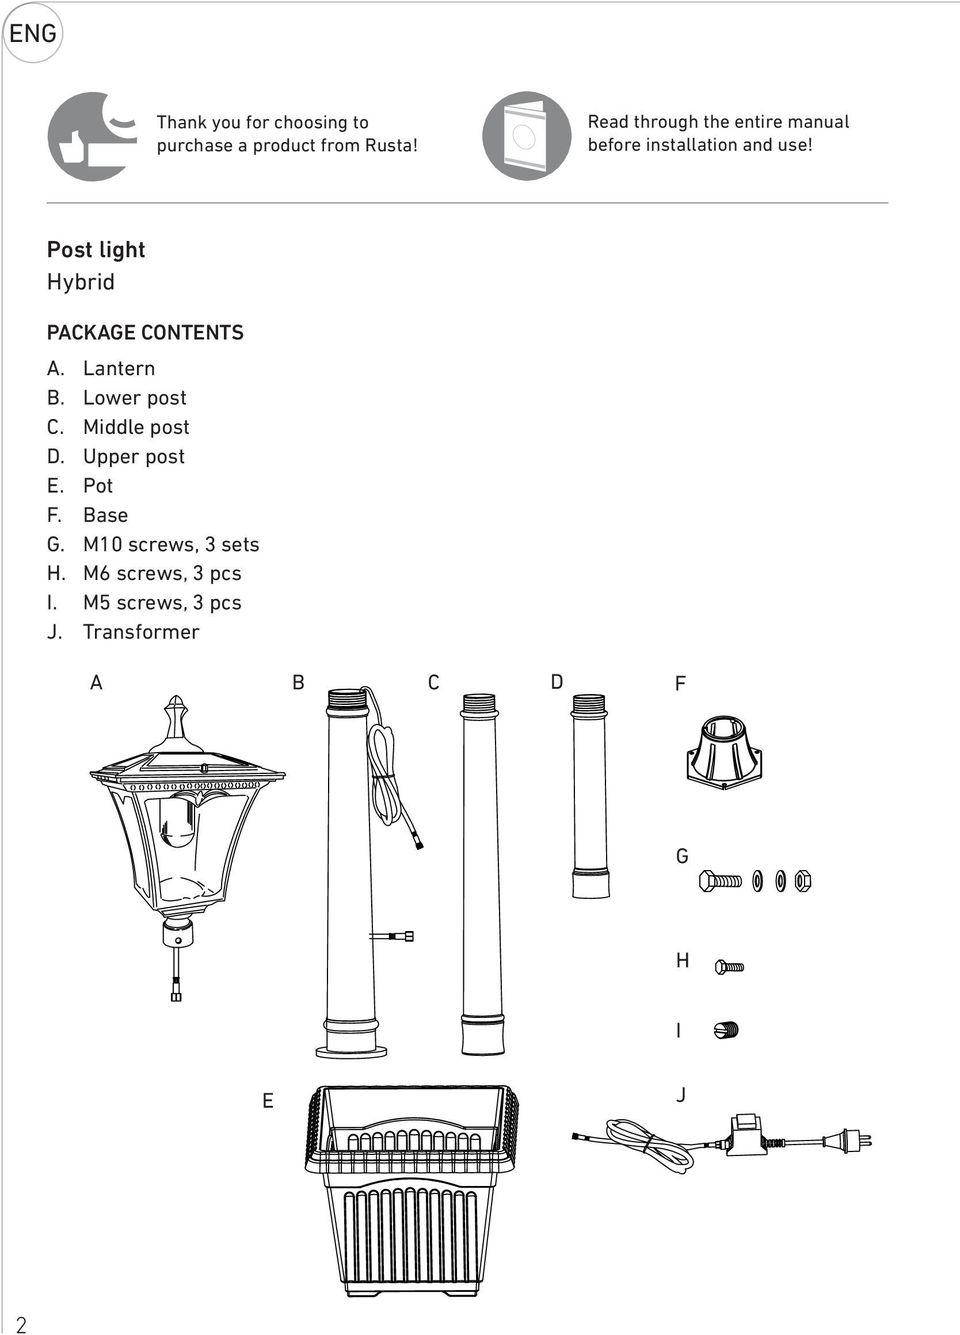 Post light Hybrid PACKAGE CONTENTS A. Lantern B. Lower post C. Middle post D.